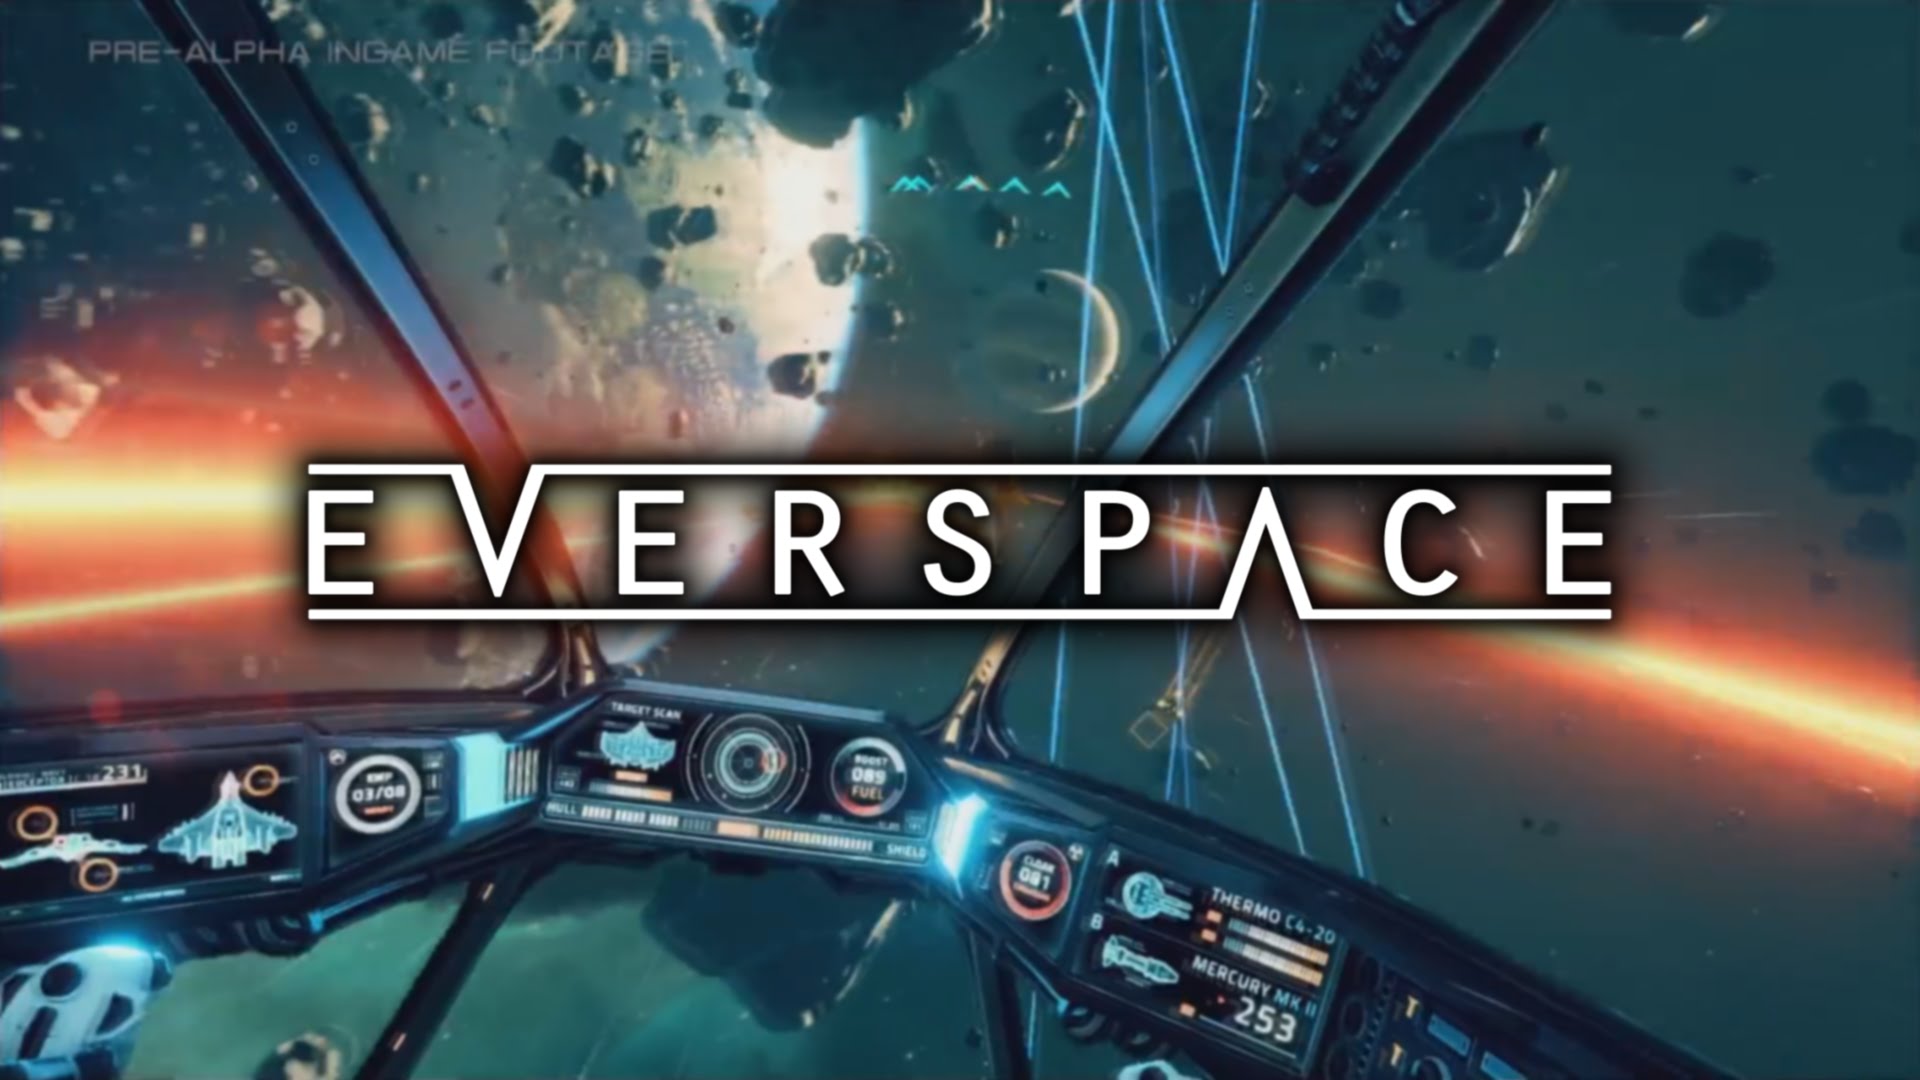 everspace 12.09.16 image01